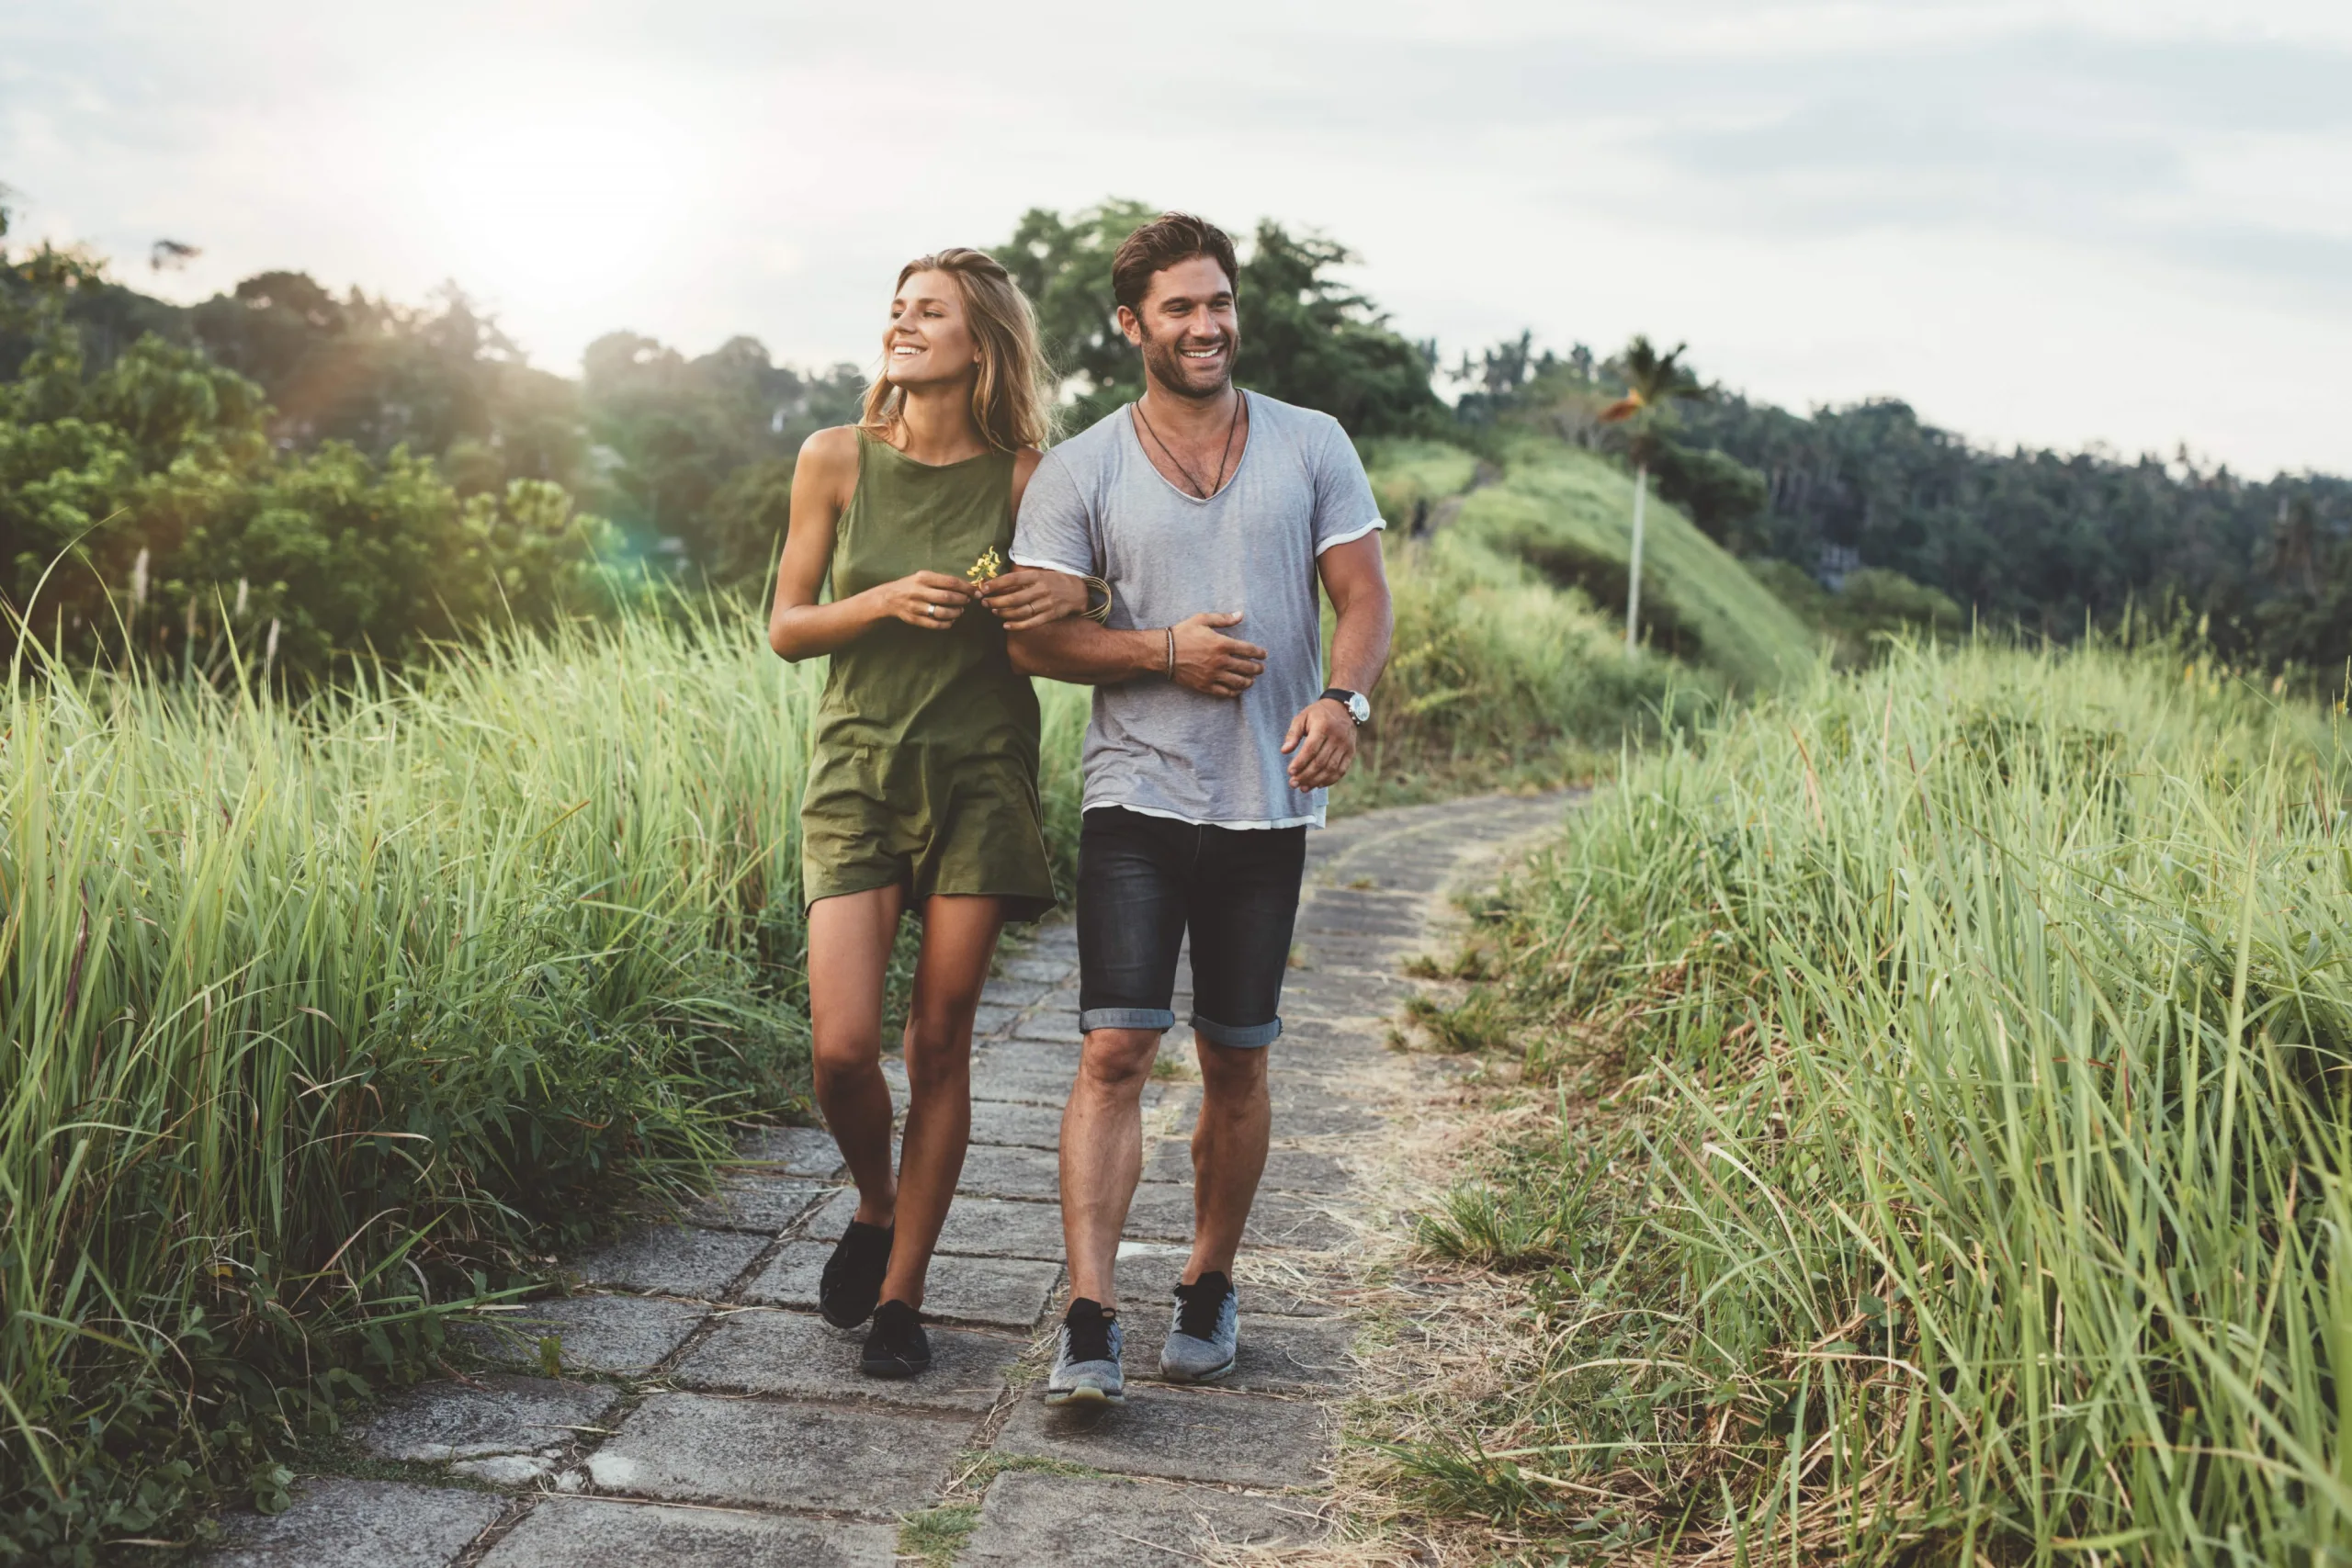 Couple walking through a path beside tall grass on a warm sunny day smiling.